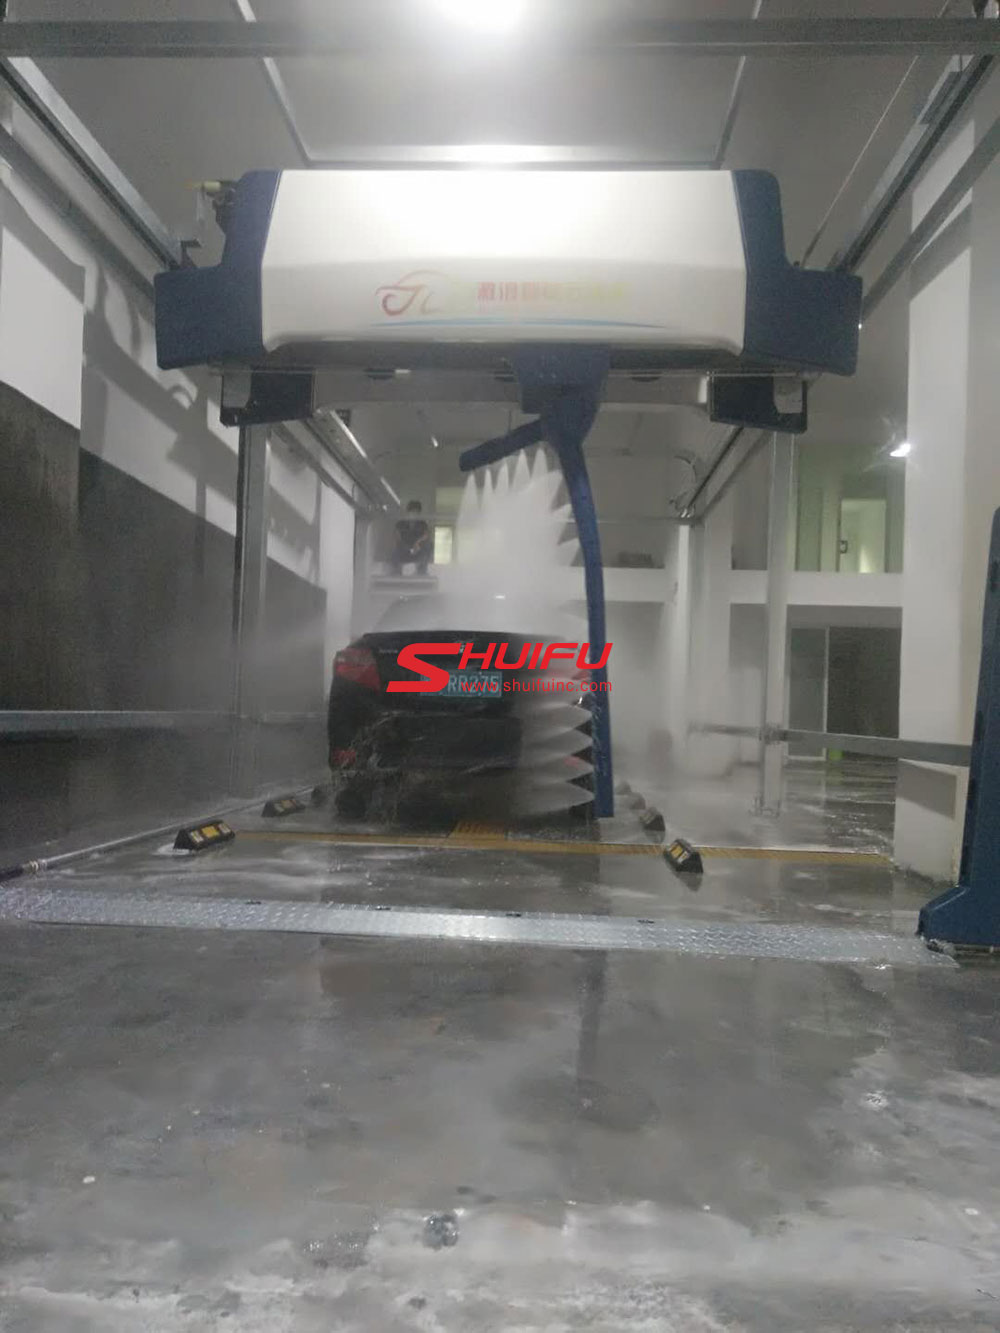 Automatic-car-wash-machine-AXE-OVERHEAD-touchless-carwash-system-installation-finished-in-Asia-manufactured-by-SHUIFU-CHINA-13